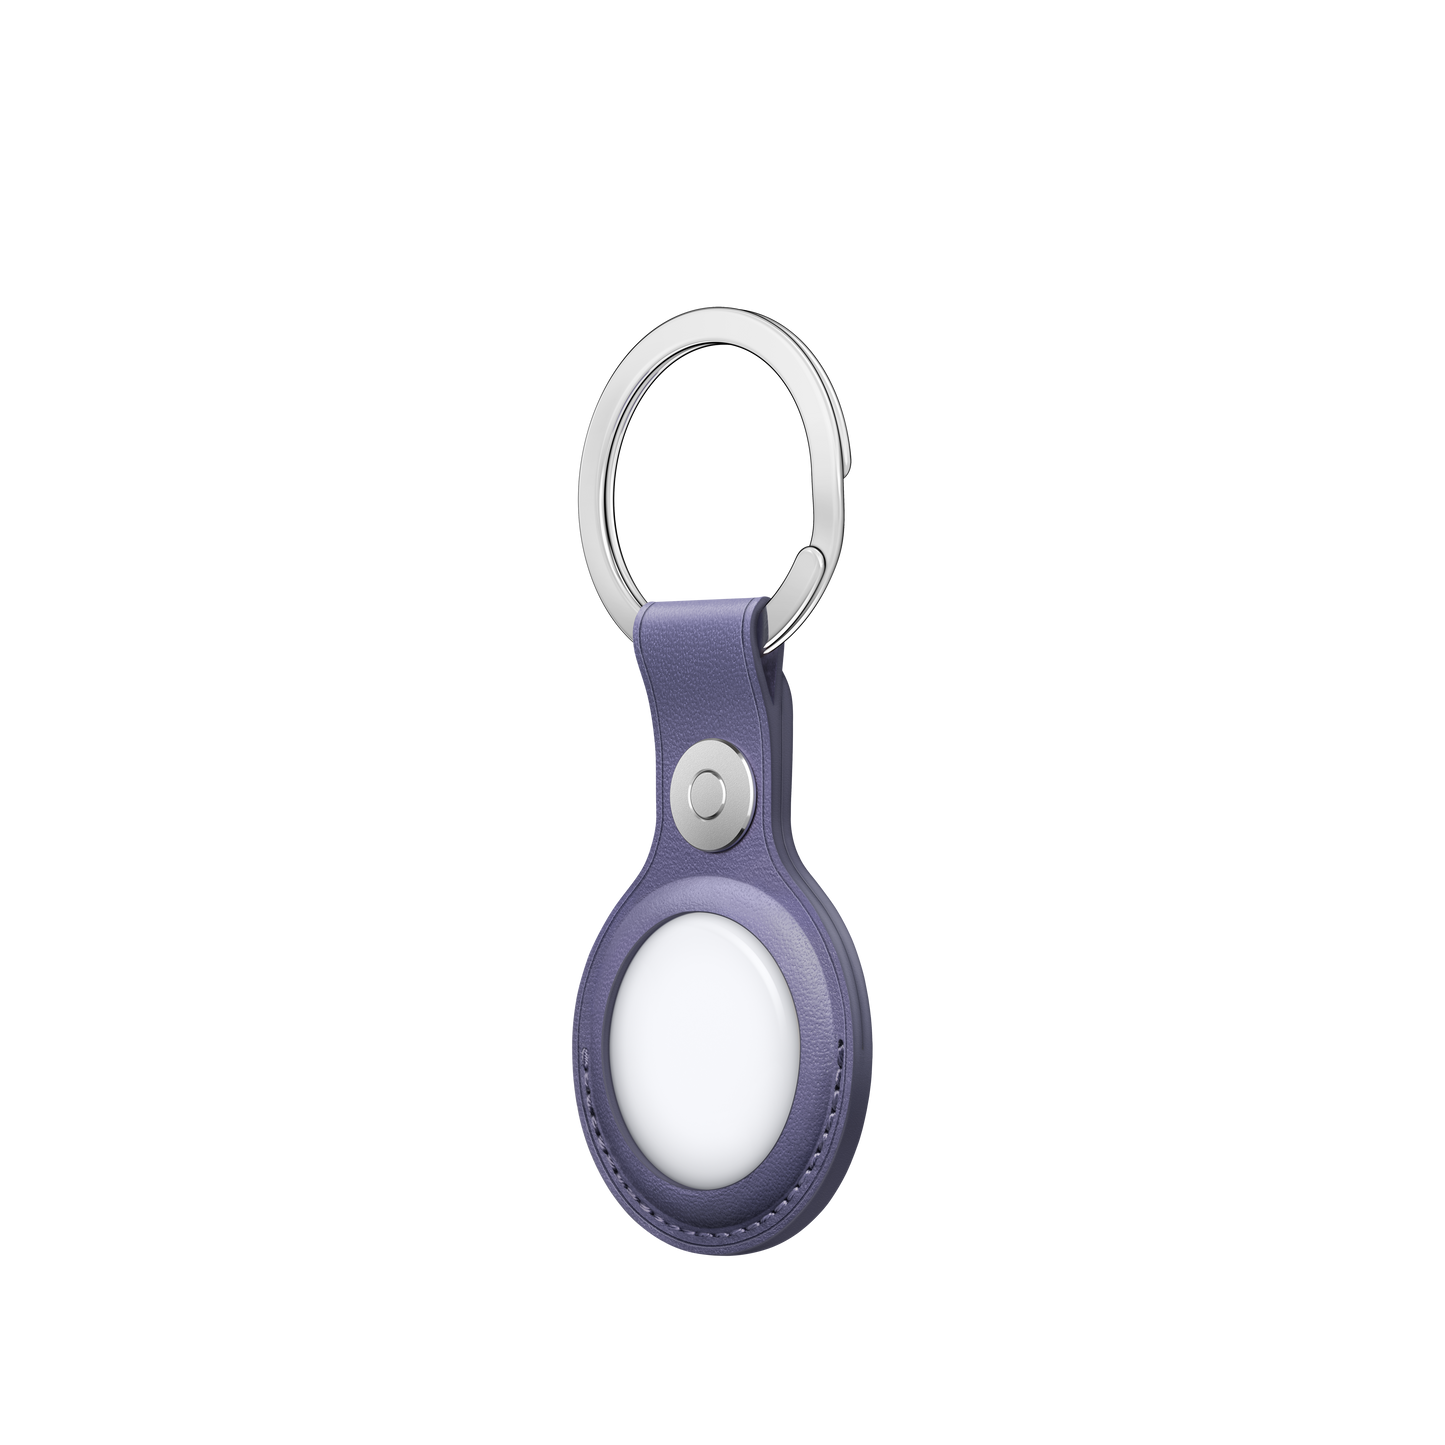 AirTag Leather Key Ring - Wisteria